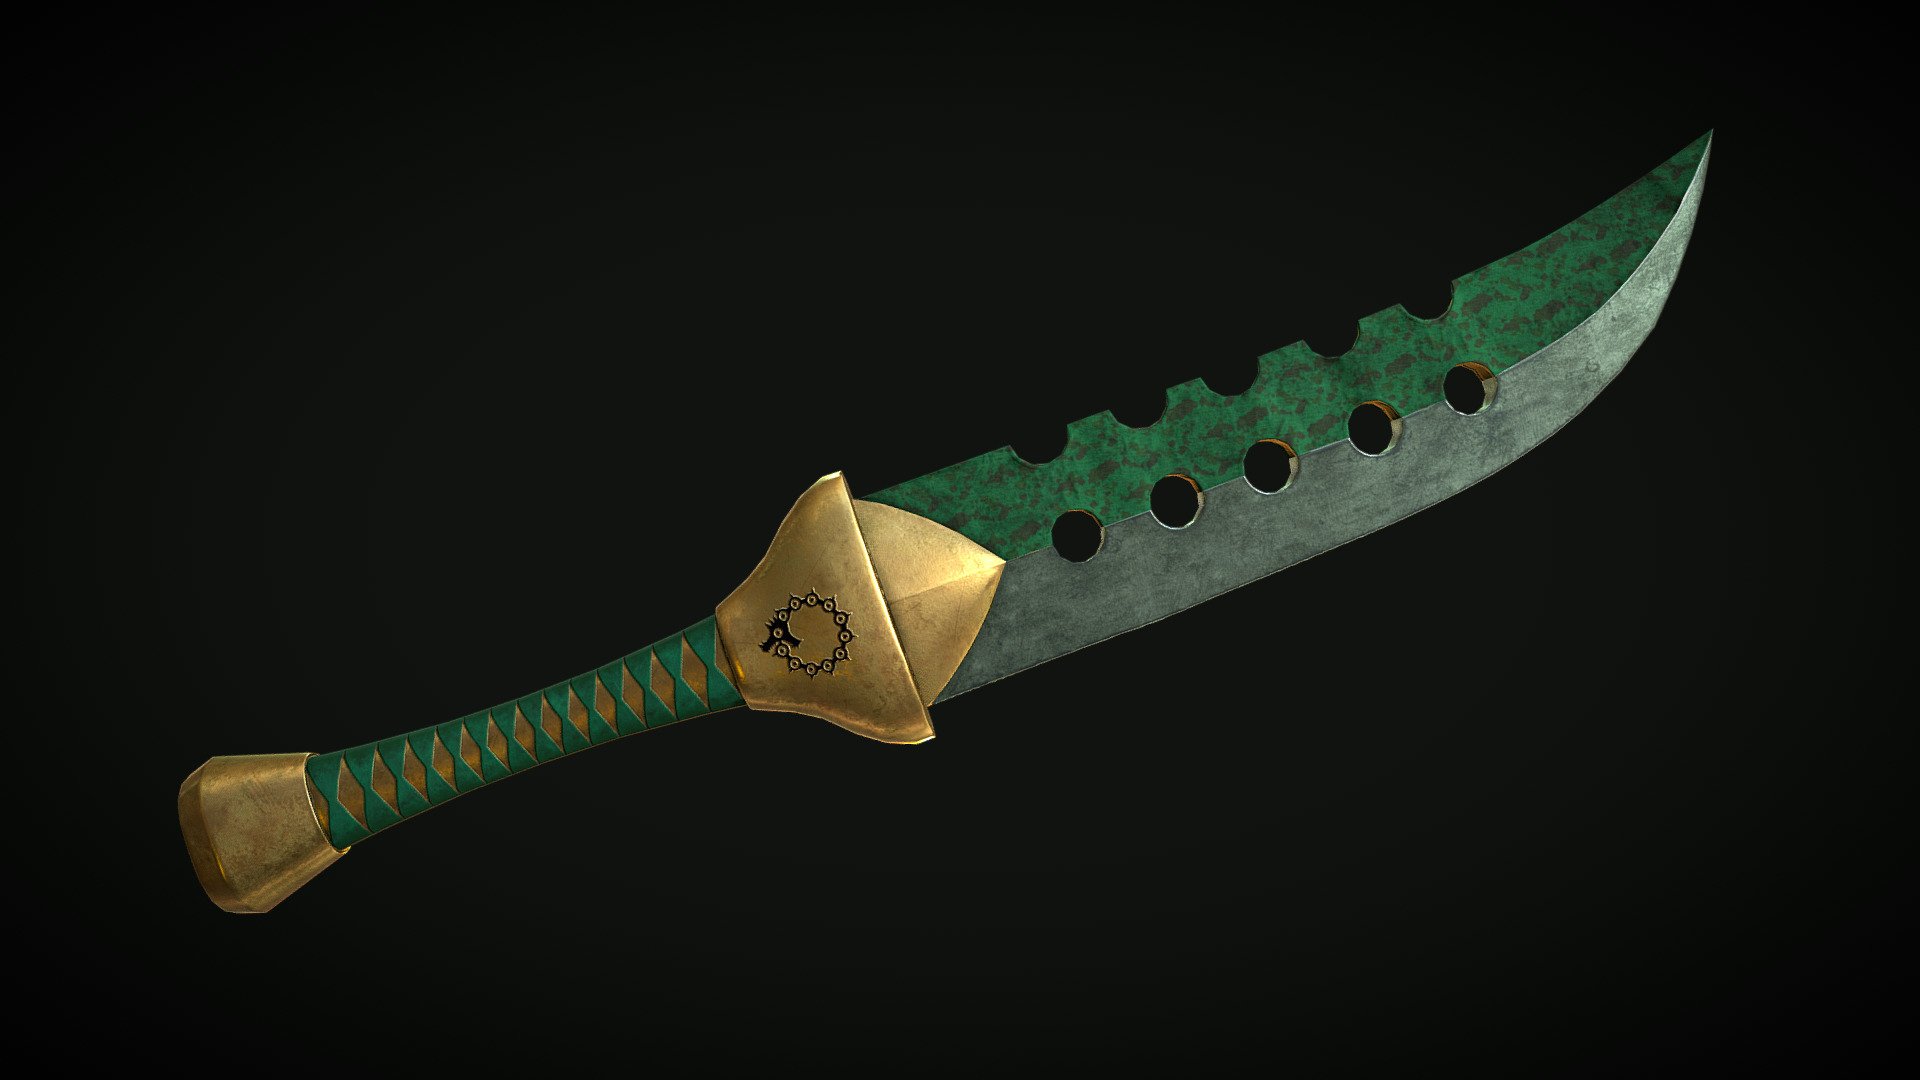 Weapon for the character Meliodas from the anime Nanatsu No Taizai the character is still on progress i will upload it in about two days.

Version: 1.0 - Nanatsu No Taizai - Lostvayne - Download Free 3D model by Hanabi (@MeganeKun) 3d model